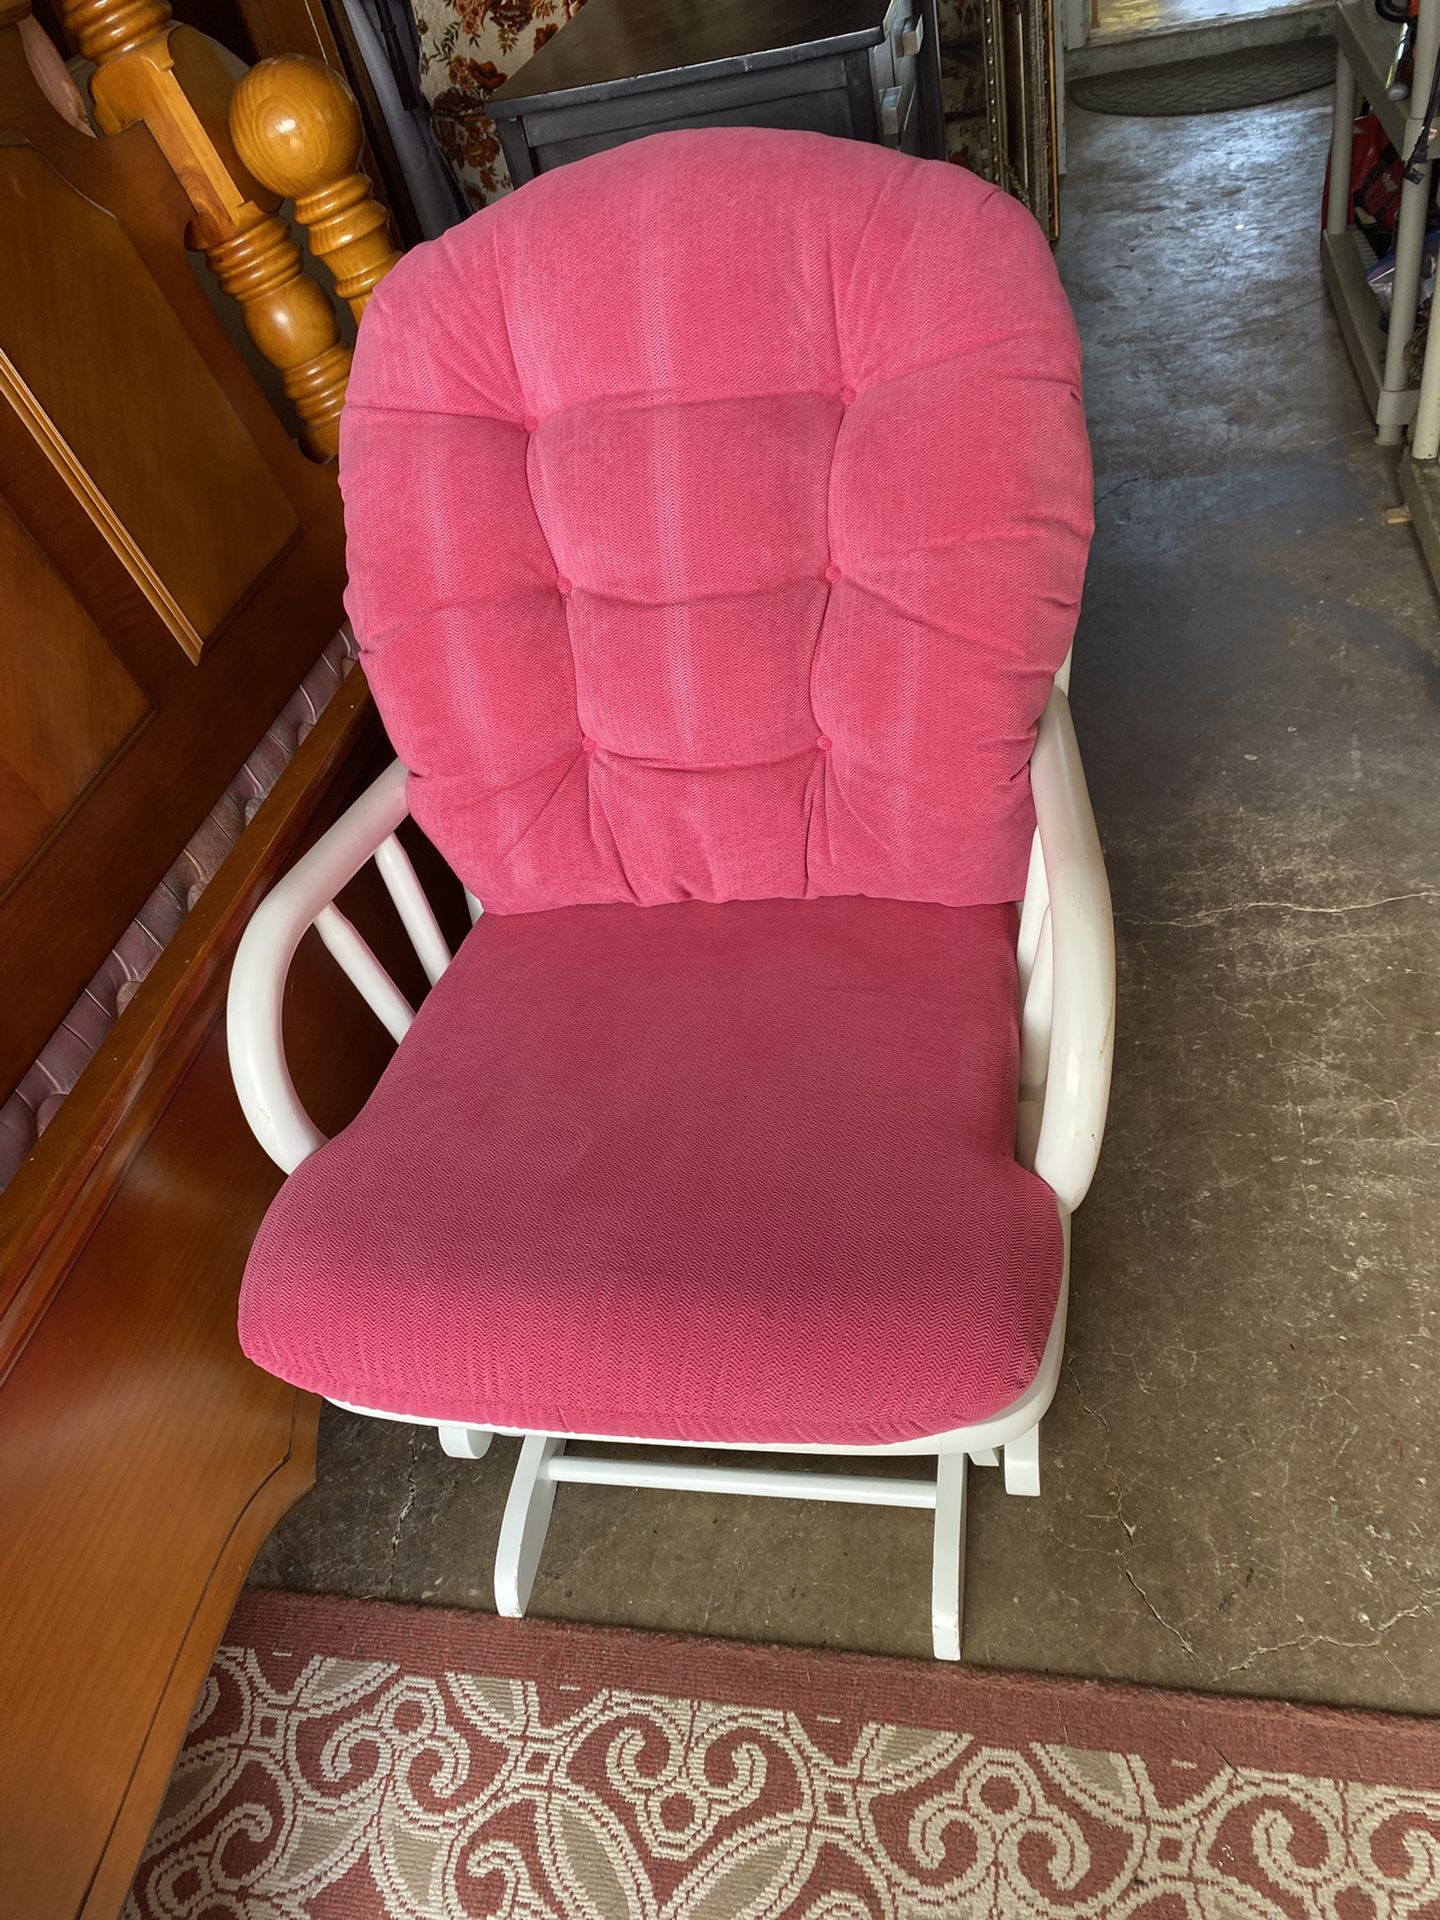 $50 Rocking/stand Still Chair White With Pink Cushion